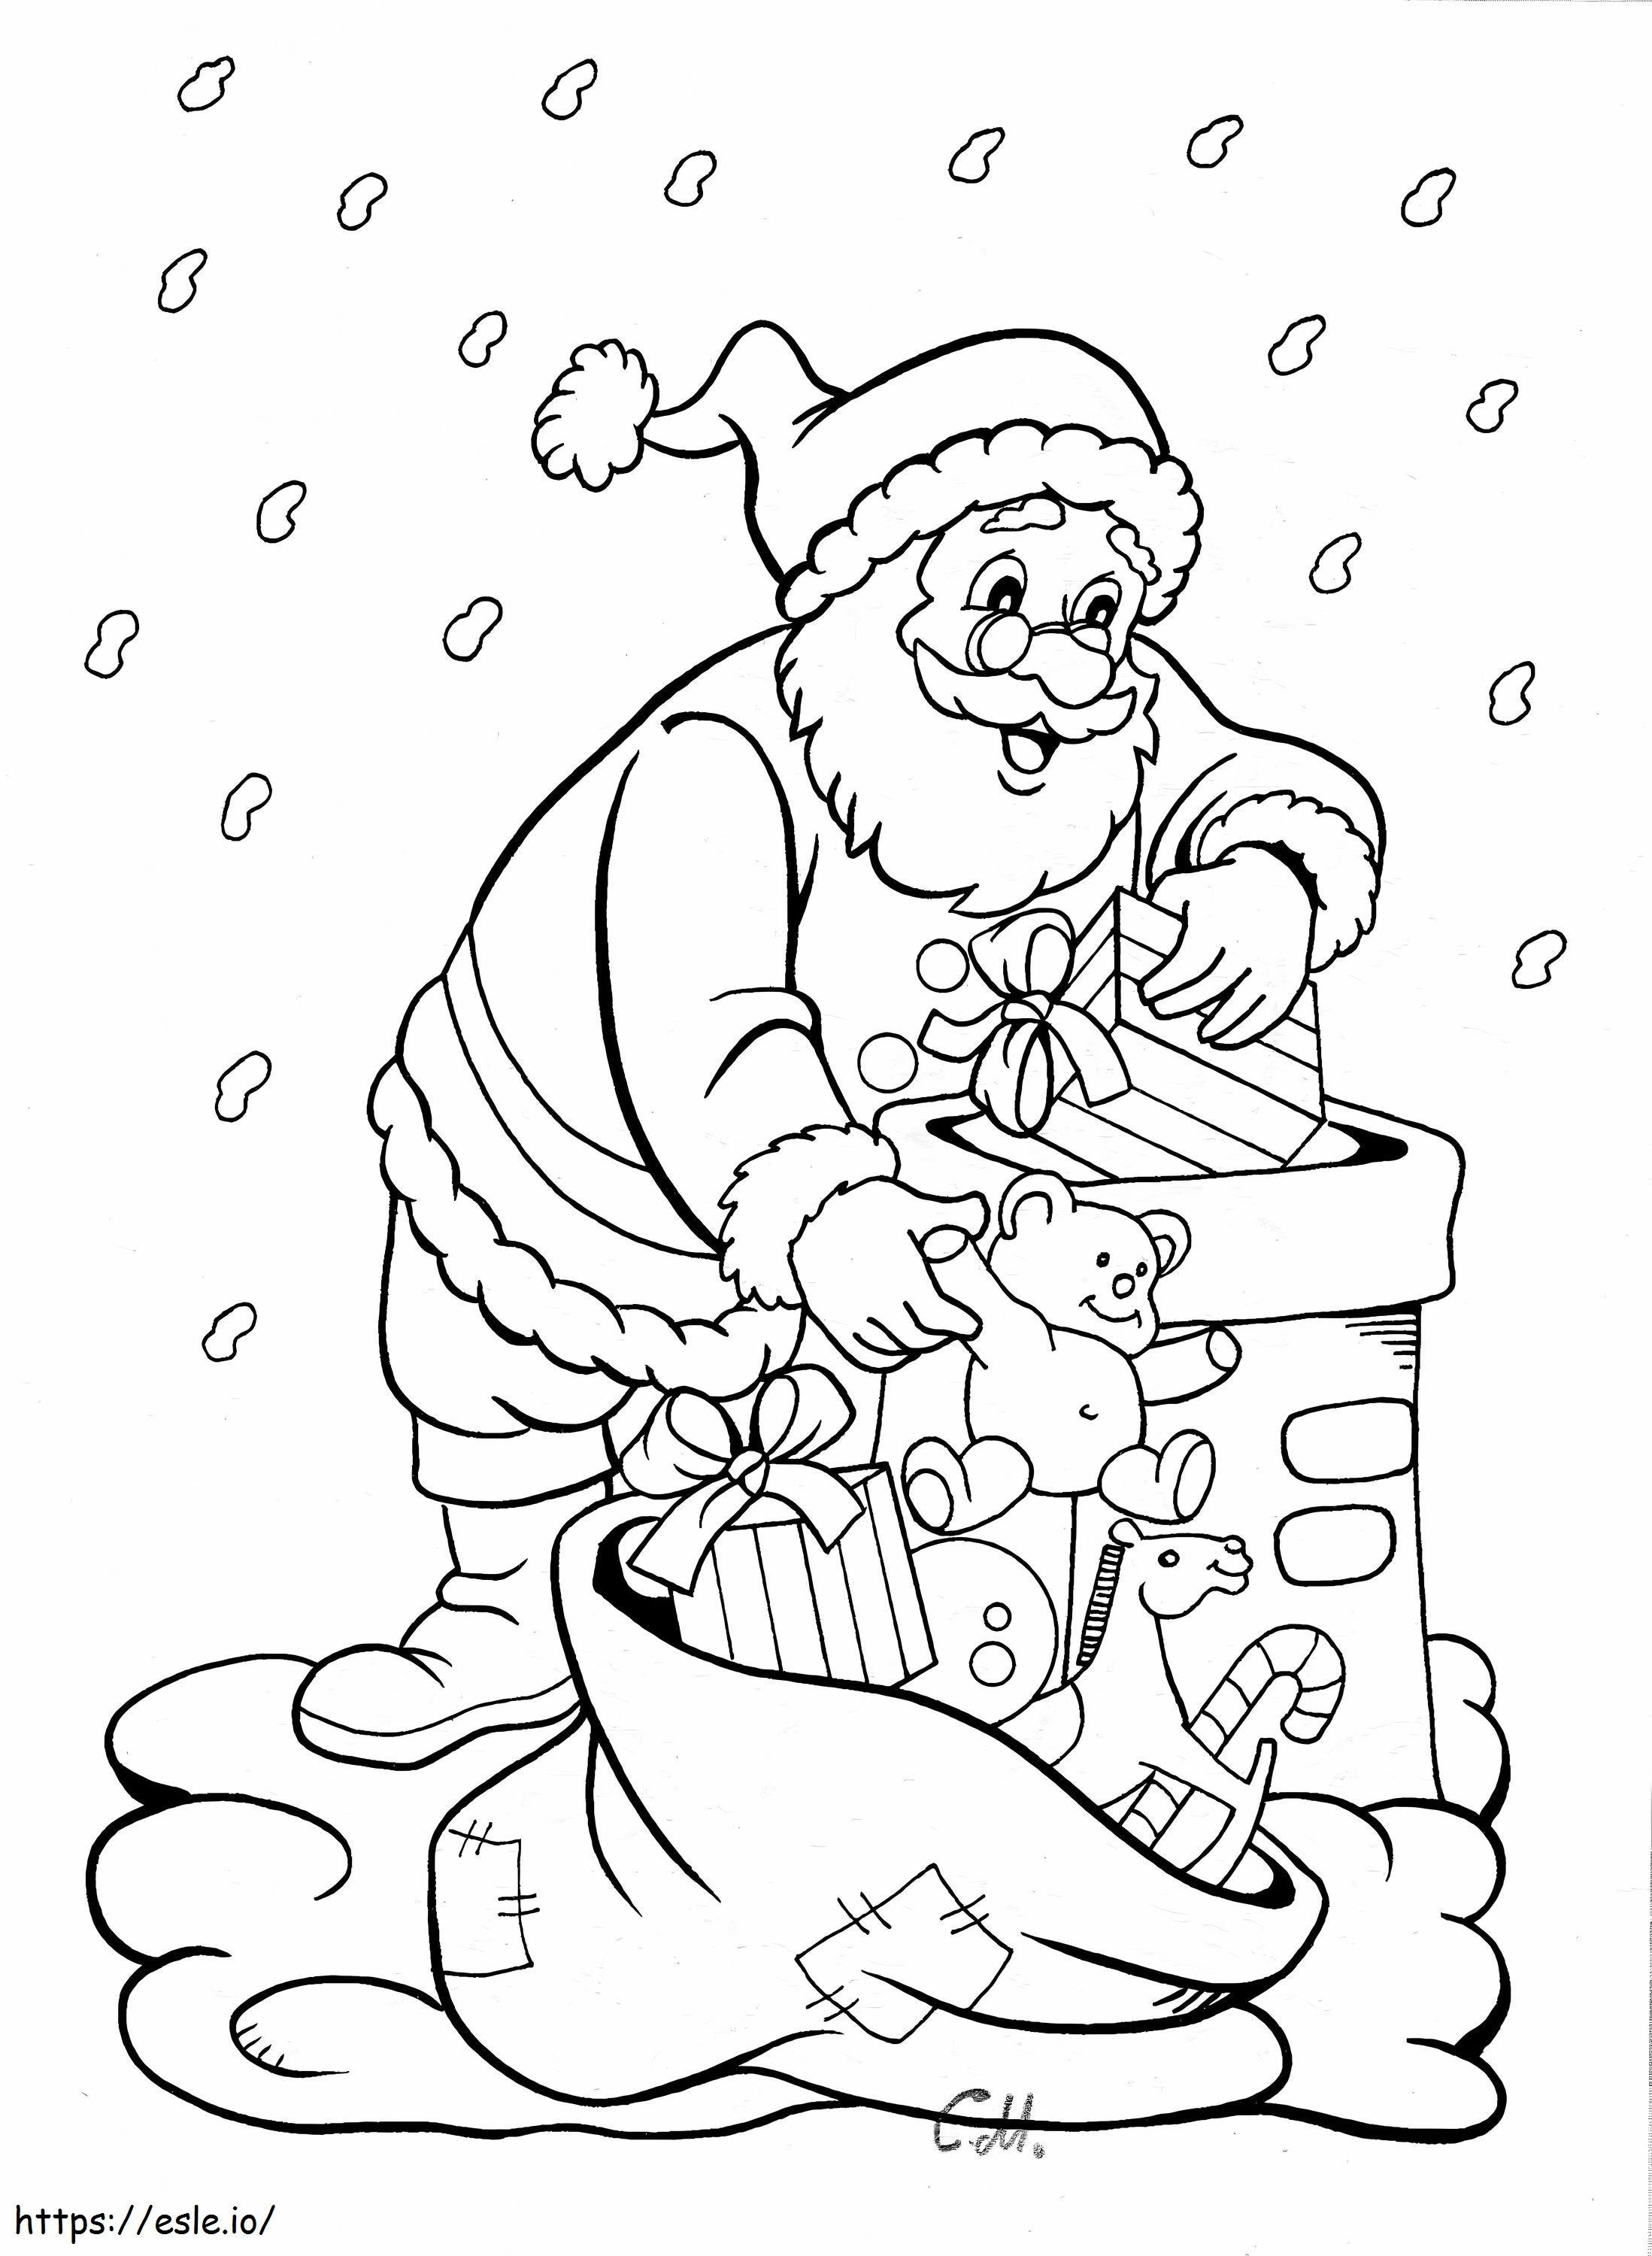 Santa Coming Down The Chimney Scaled coloring page